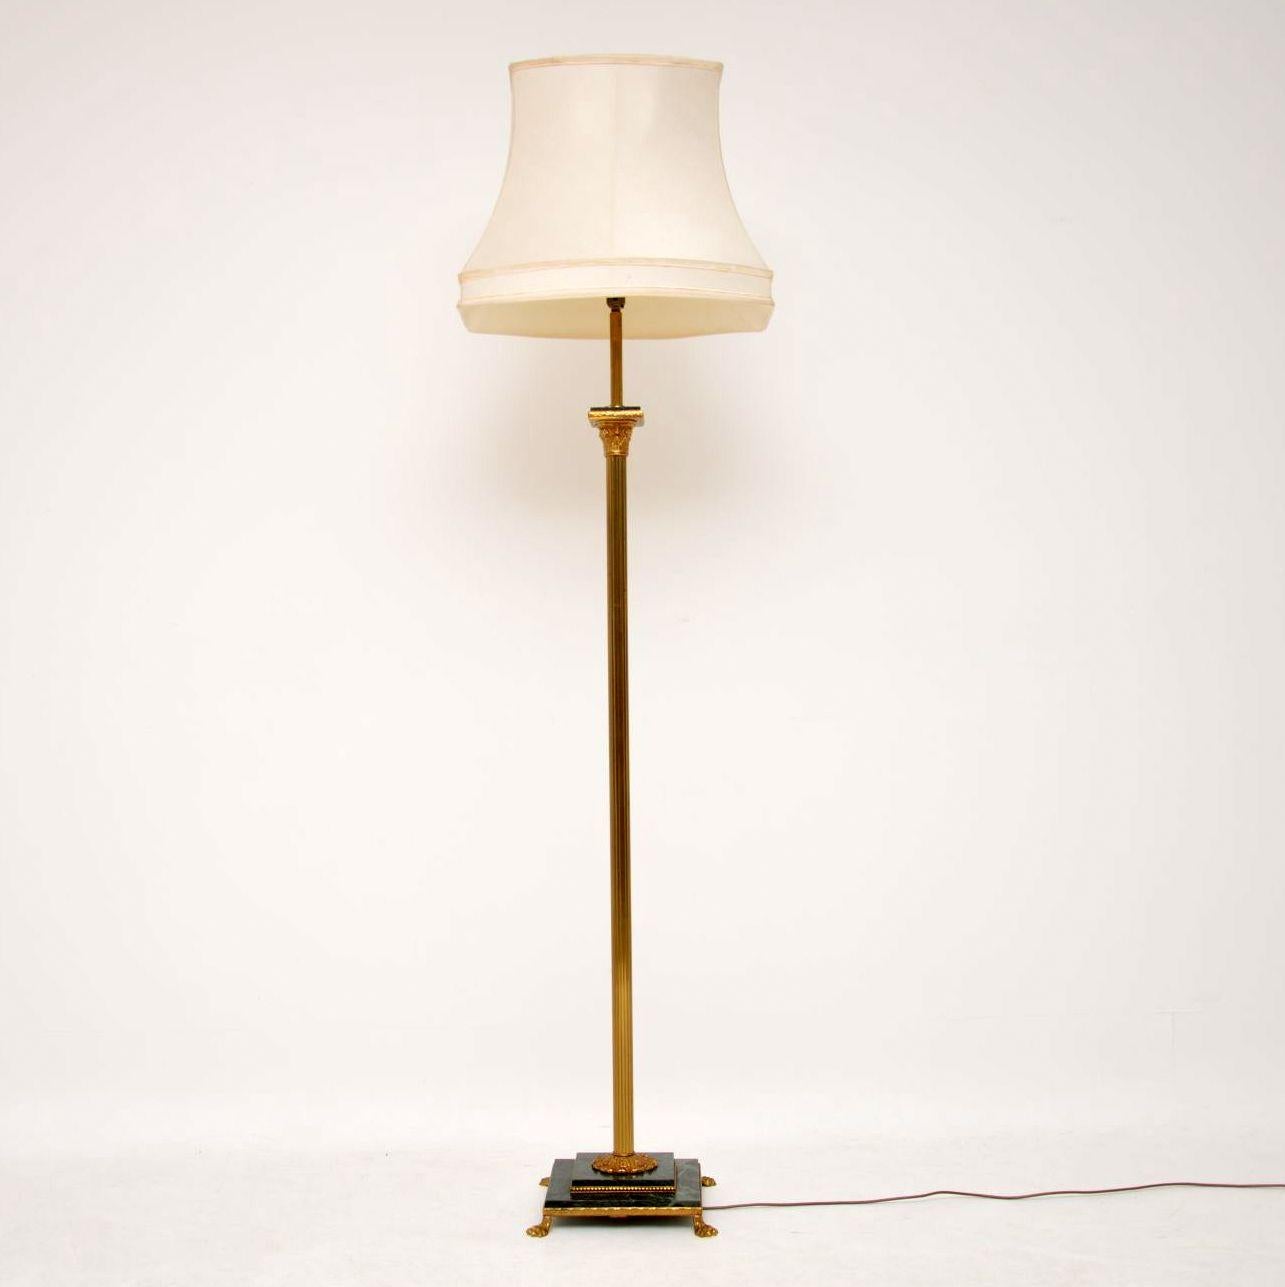 This antique French brass and marble standard lamp is of very good quality and is in working order, having just been re-wired. The design is in the form of a Corinthian column, with fluting and paw feet. The base is marble and there is a smaller